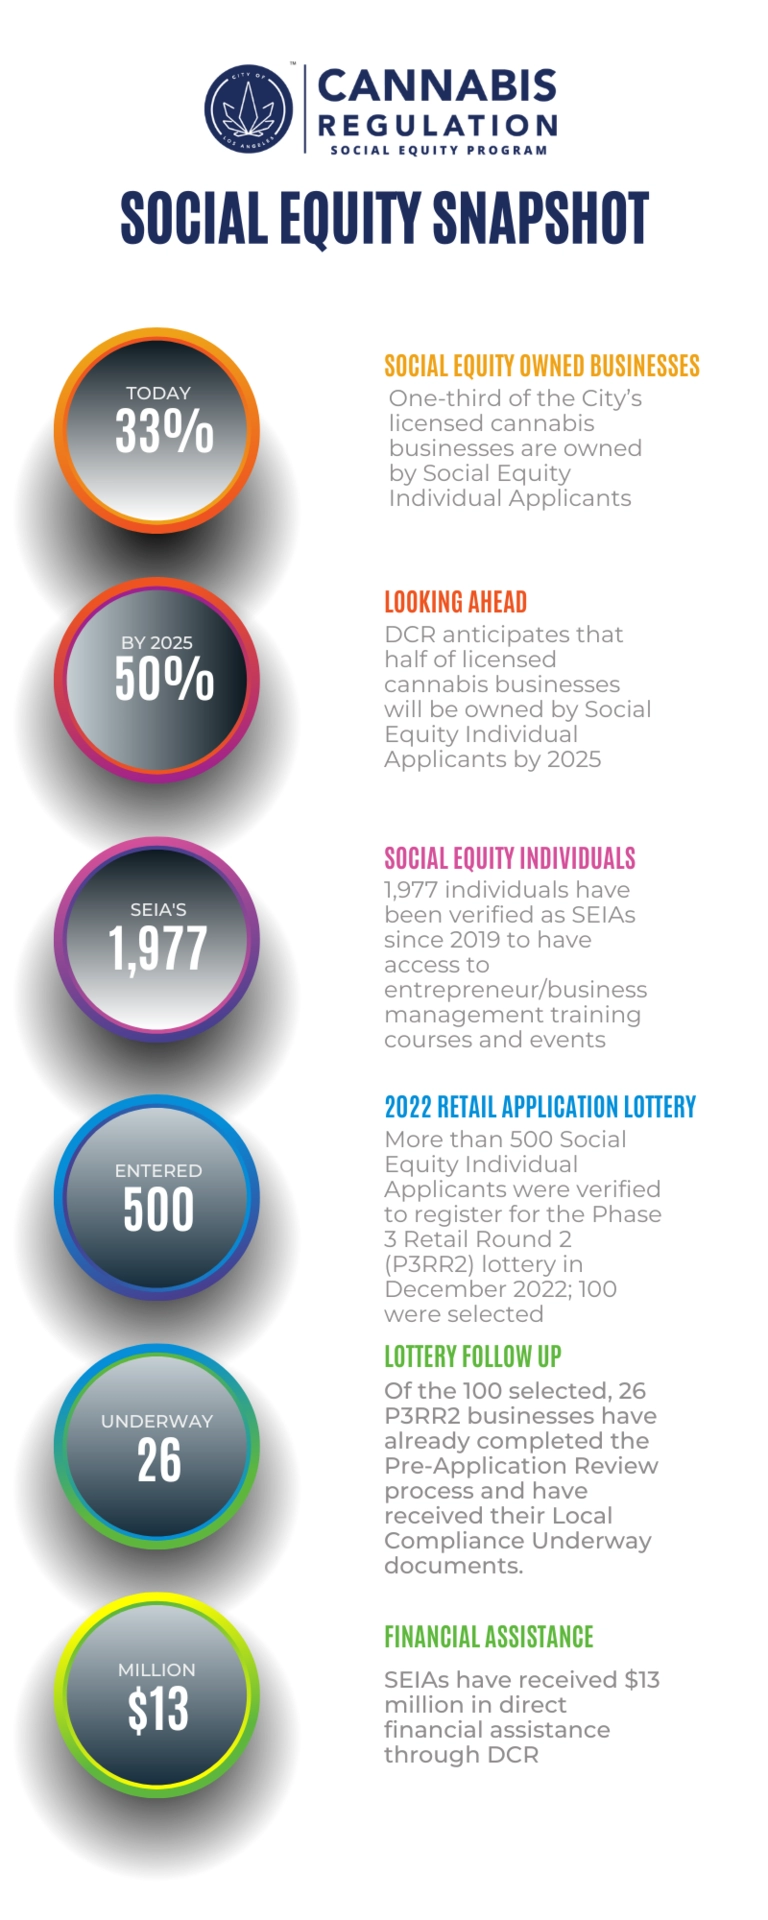 Social Equity Snapshot  Today 33%  SOCIAL EQUITY OWNED BUSINESSES One-third of the City’s licensed cannabis businesses are owned by Social Equity Individual Applicants  By 2025 50% LOOKING AHEAD DCR anticipates that half of licensed cannabis businesses will be owned by Social Equity Individual Applicants by 2025  SEIAs 1,977 SOCIAL EQUITY INDIVIDUALS 1,977 individuals have been verified as SEIAs since 2019 to have access to entrepreneur/business management training courses and events  Entered 500 2022 RETAI